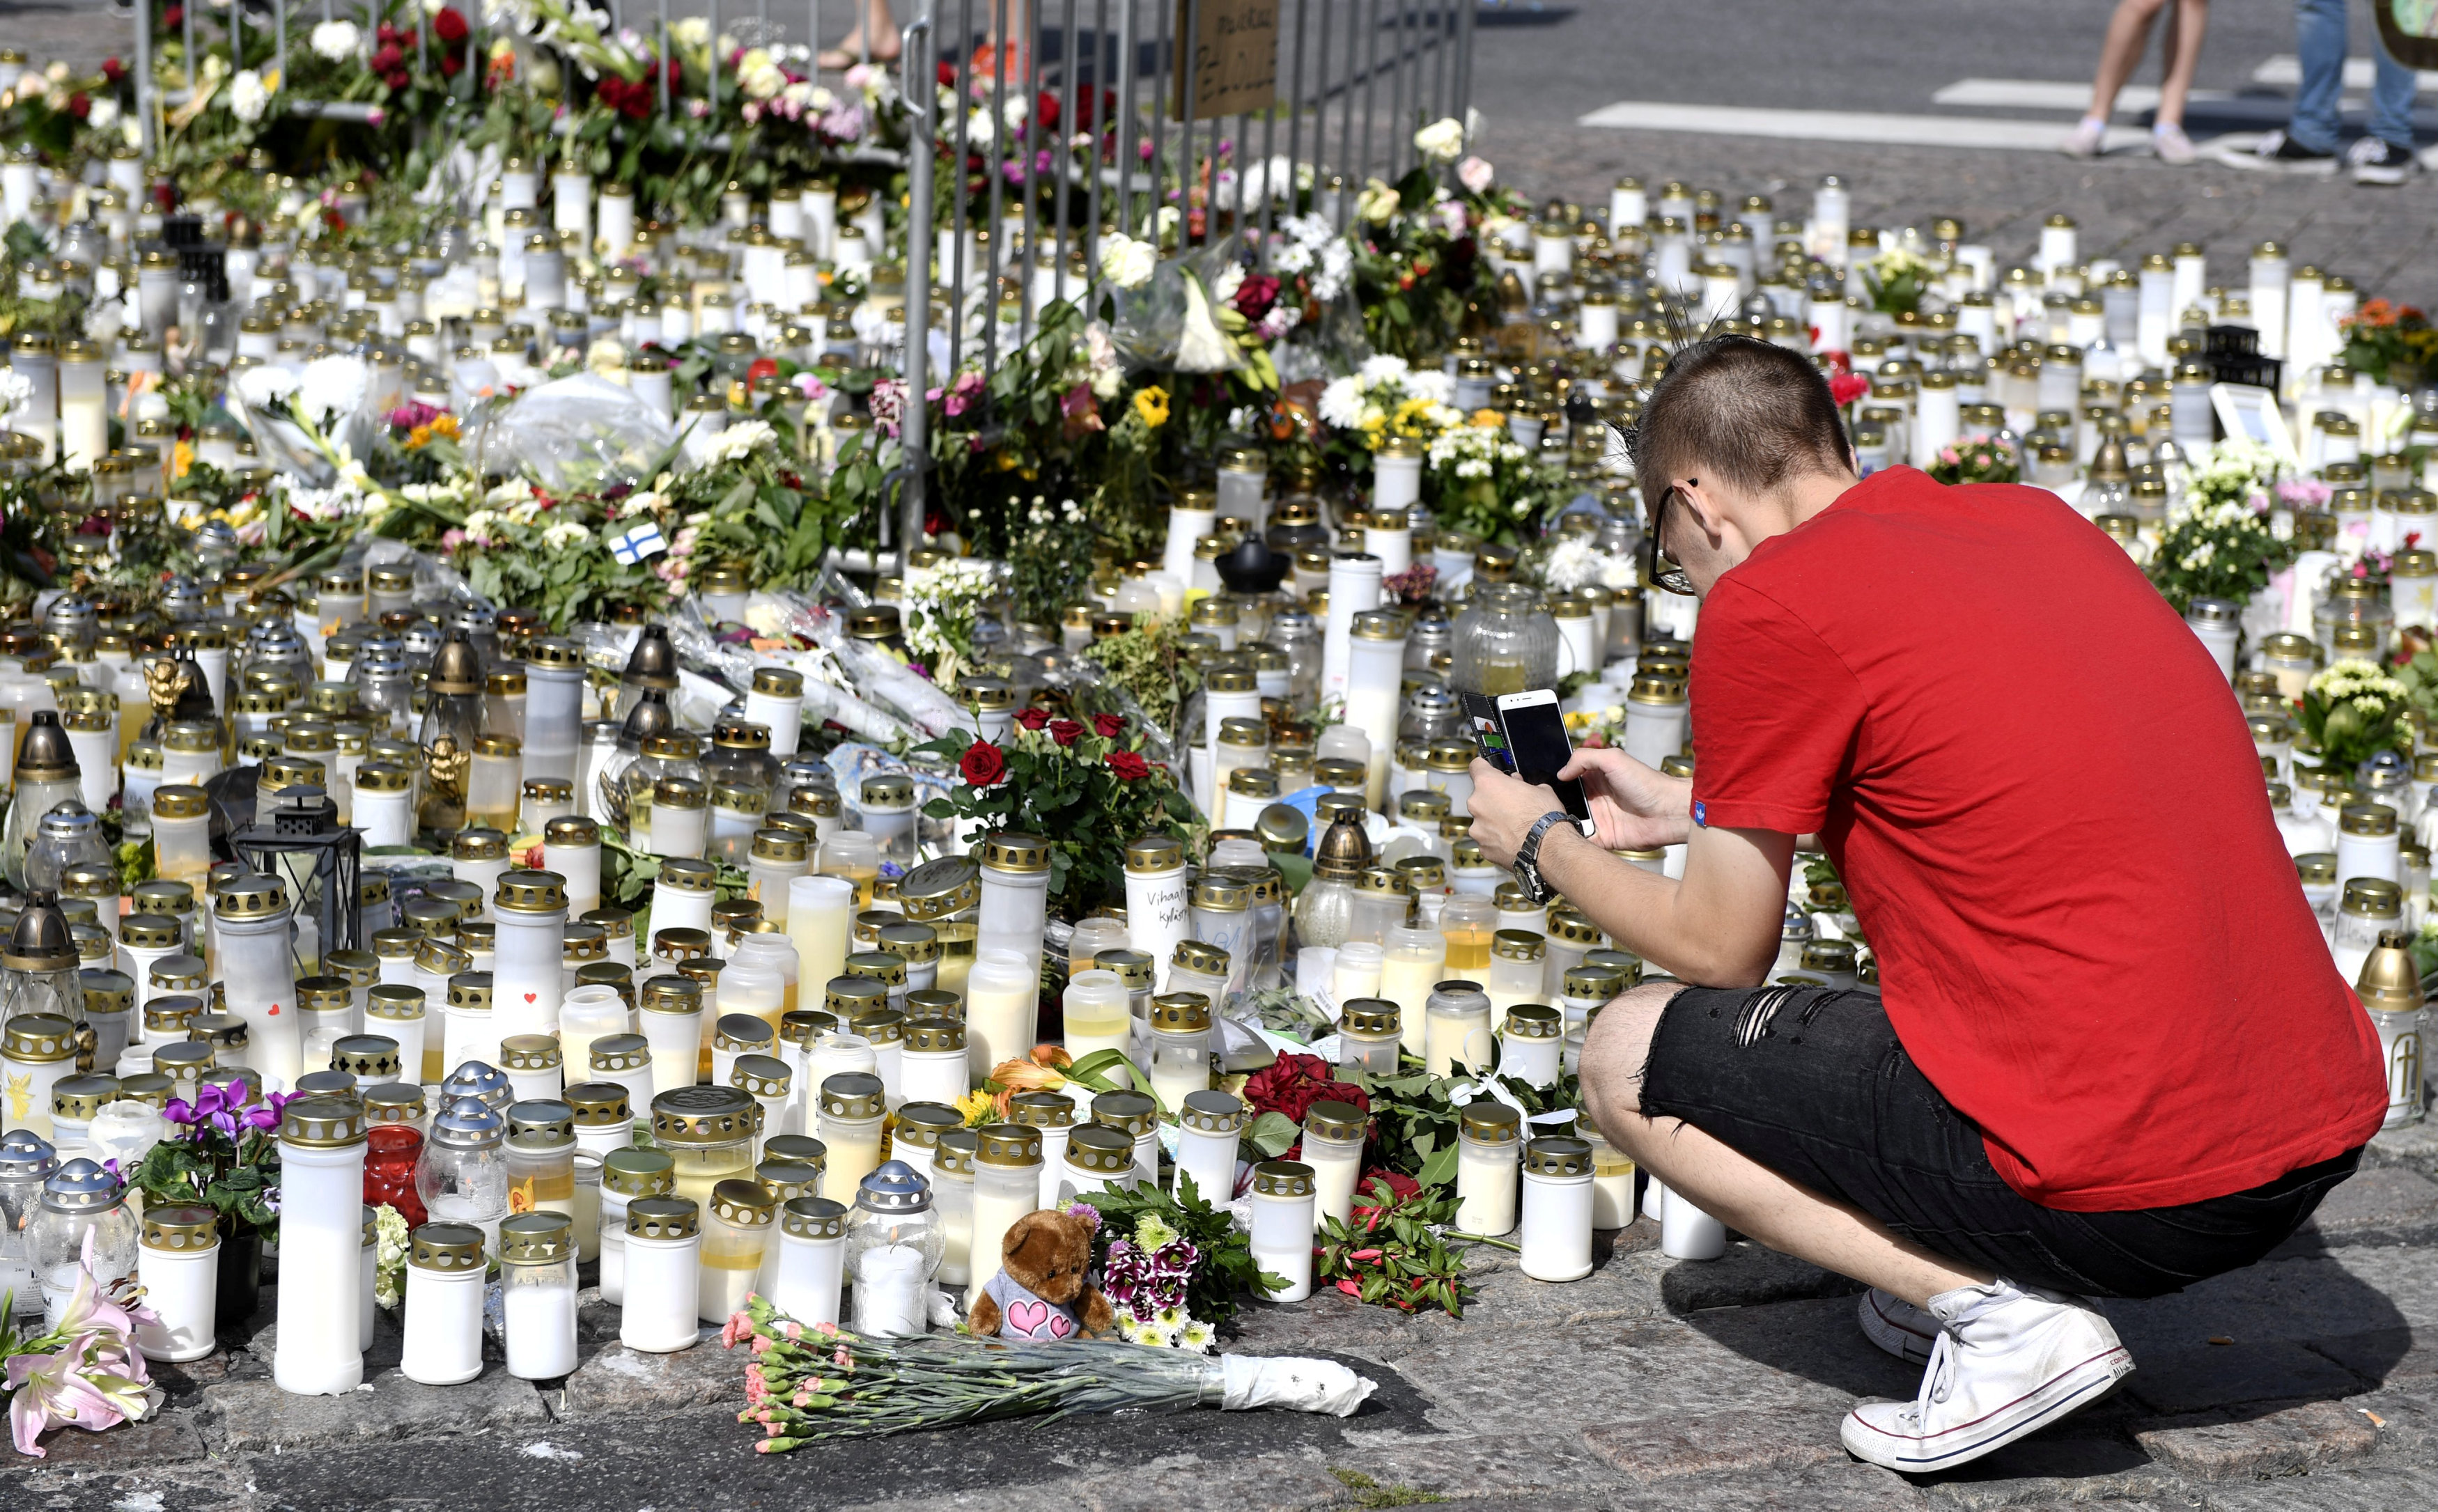 Finnish police search new sites, talk to suspect in knife rampage probe